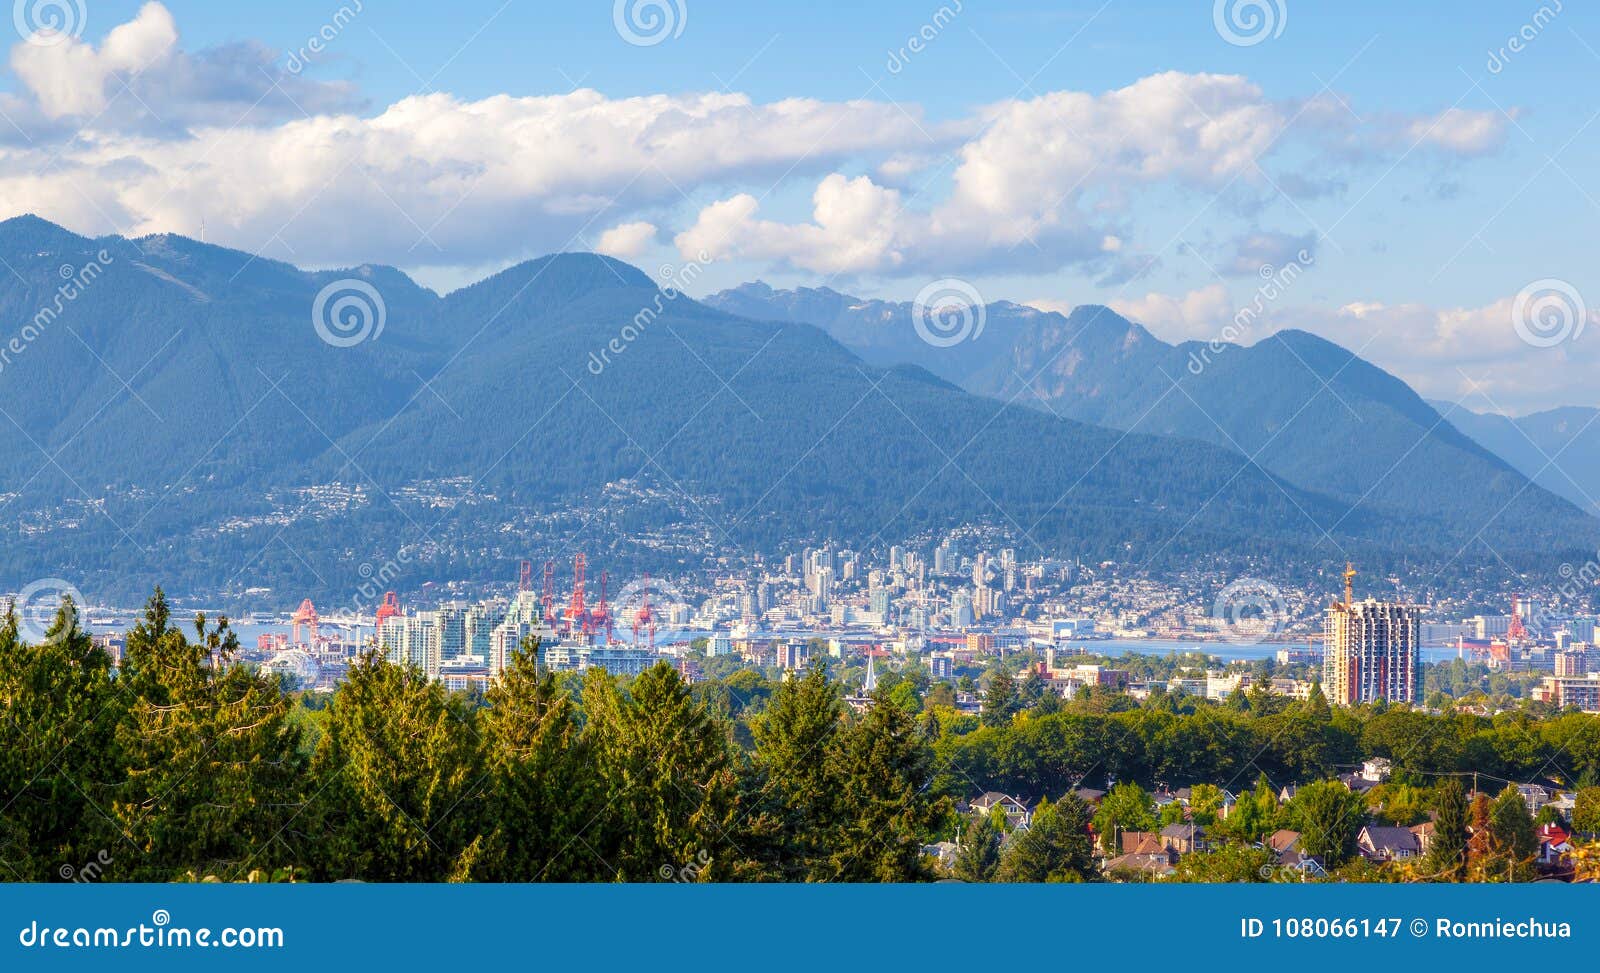 vancouver city and north shore mountains